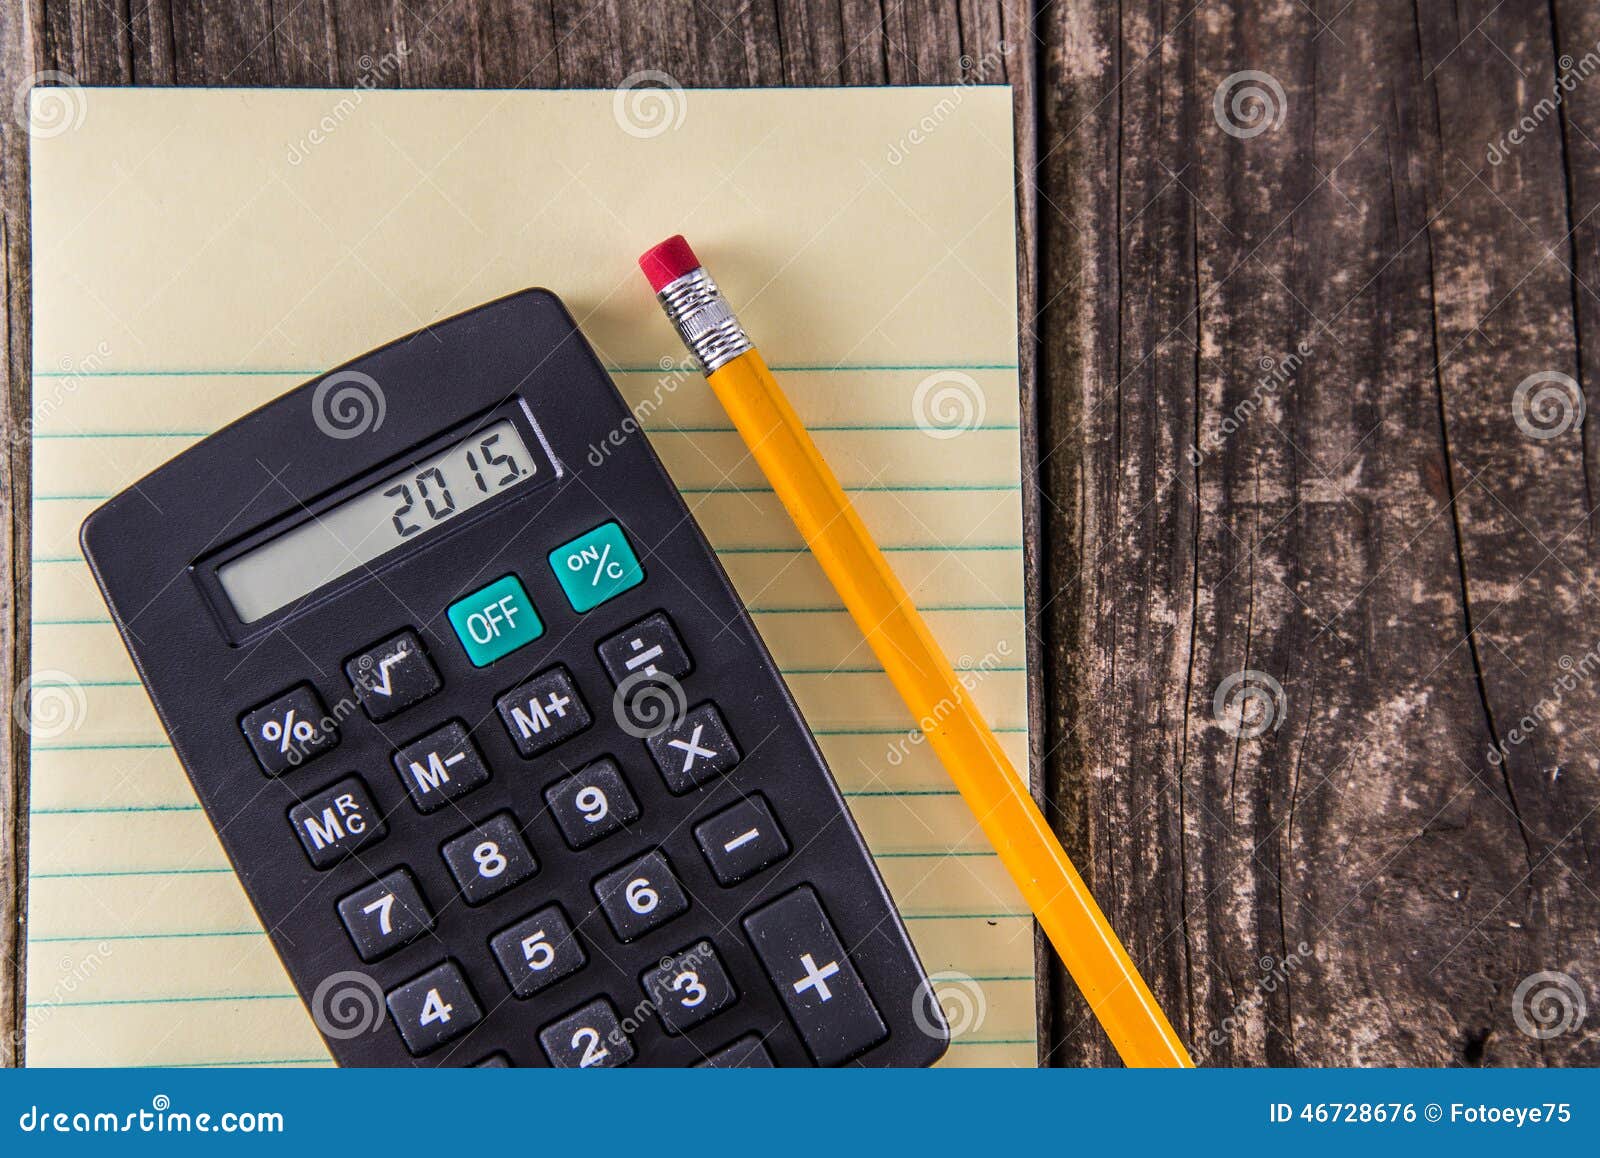 Yellow Tablet Pencil &amp; Calculator on Vintage Desk. Yellow Tablet with lines, calculator and yellow pencil laying on old vintage wood desk background - year 2015 on the LCD - concept for 2015 tax return filing / accounting